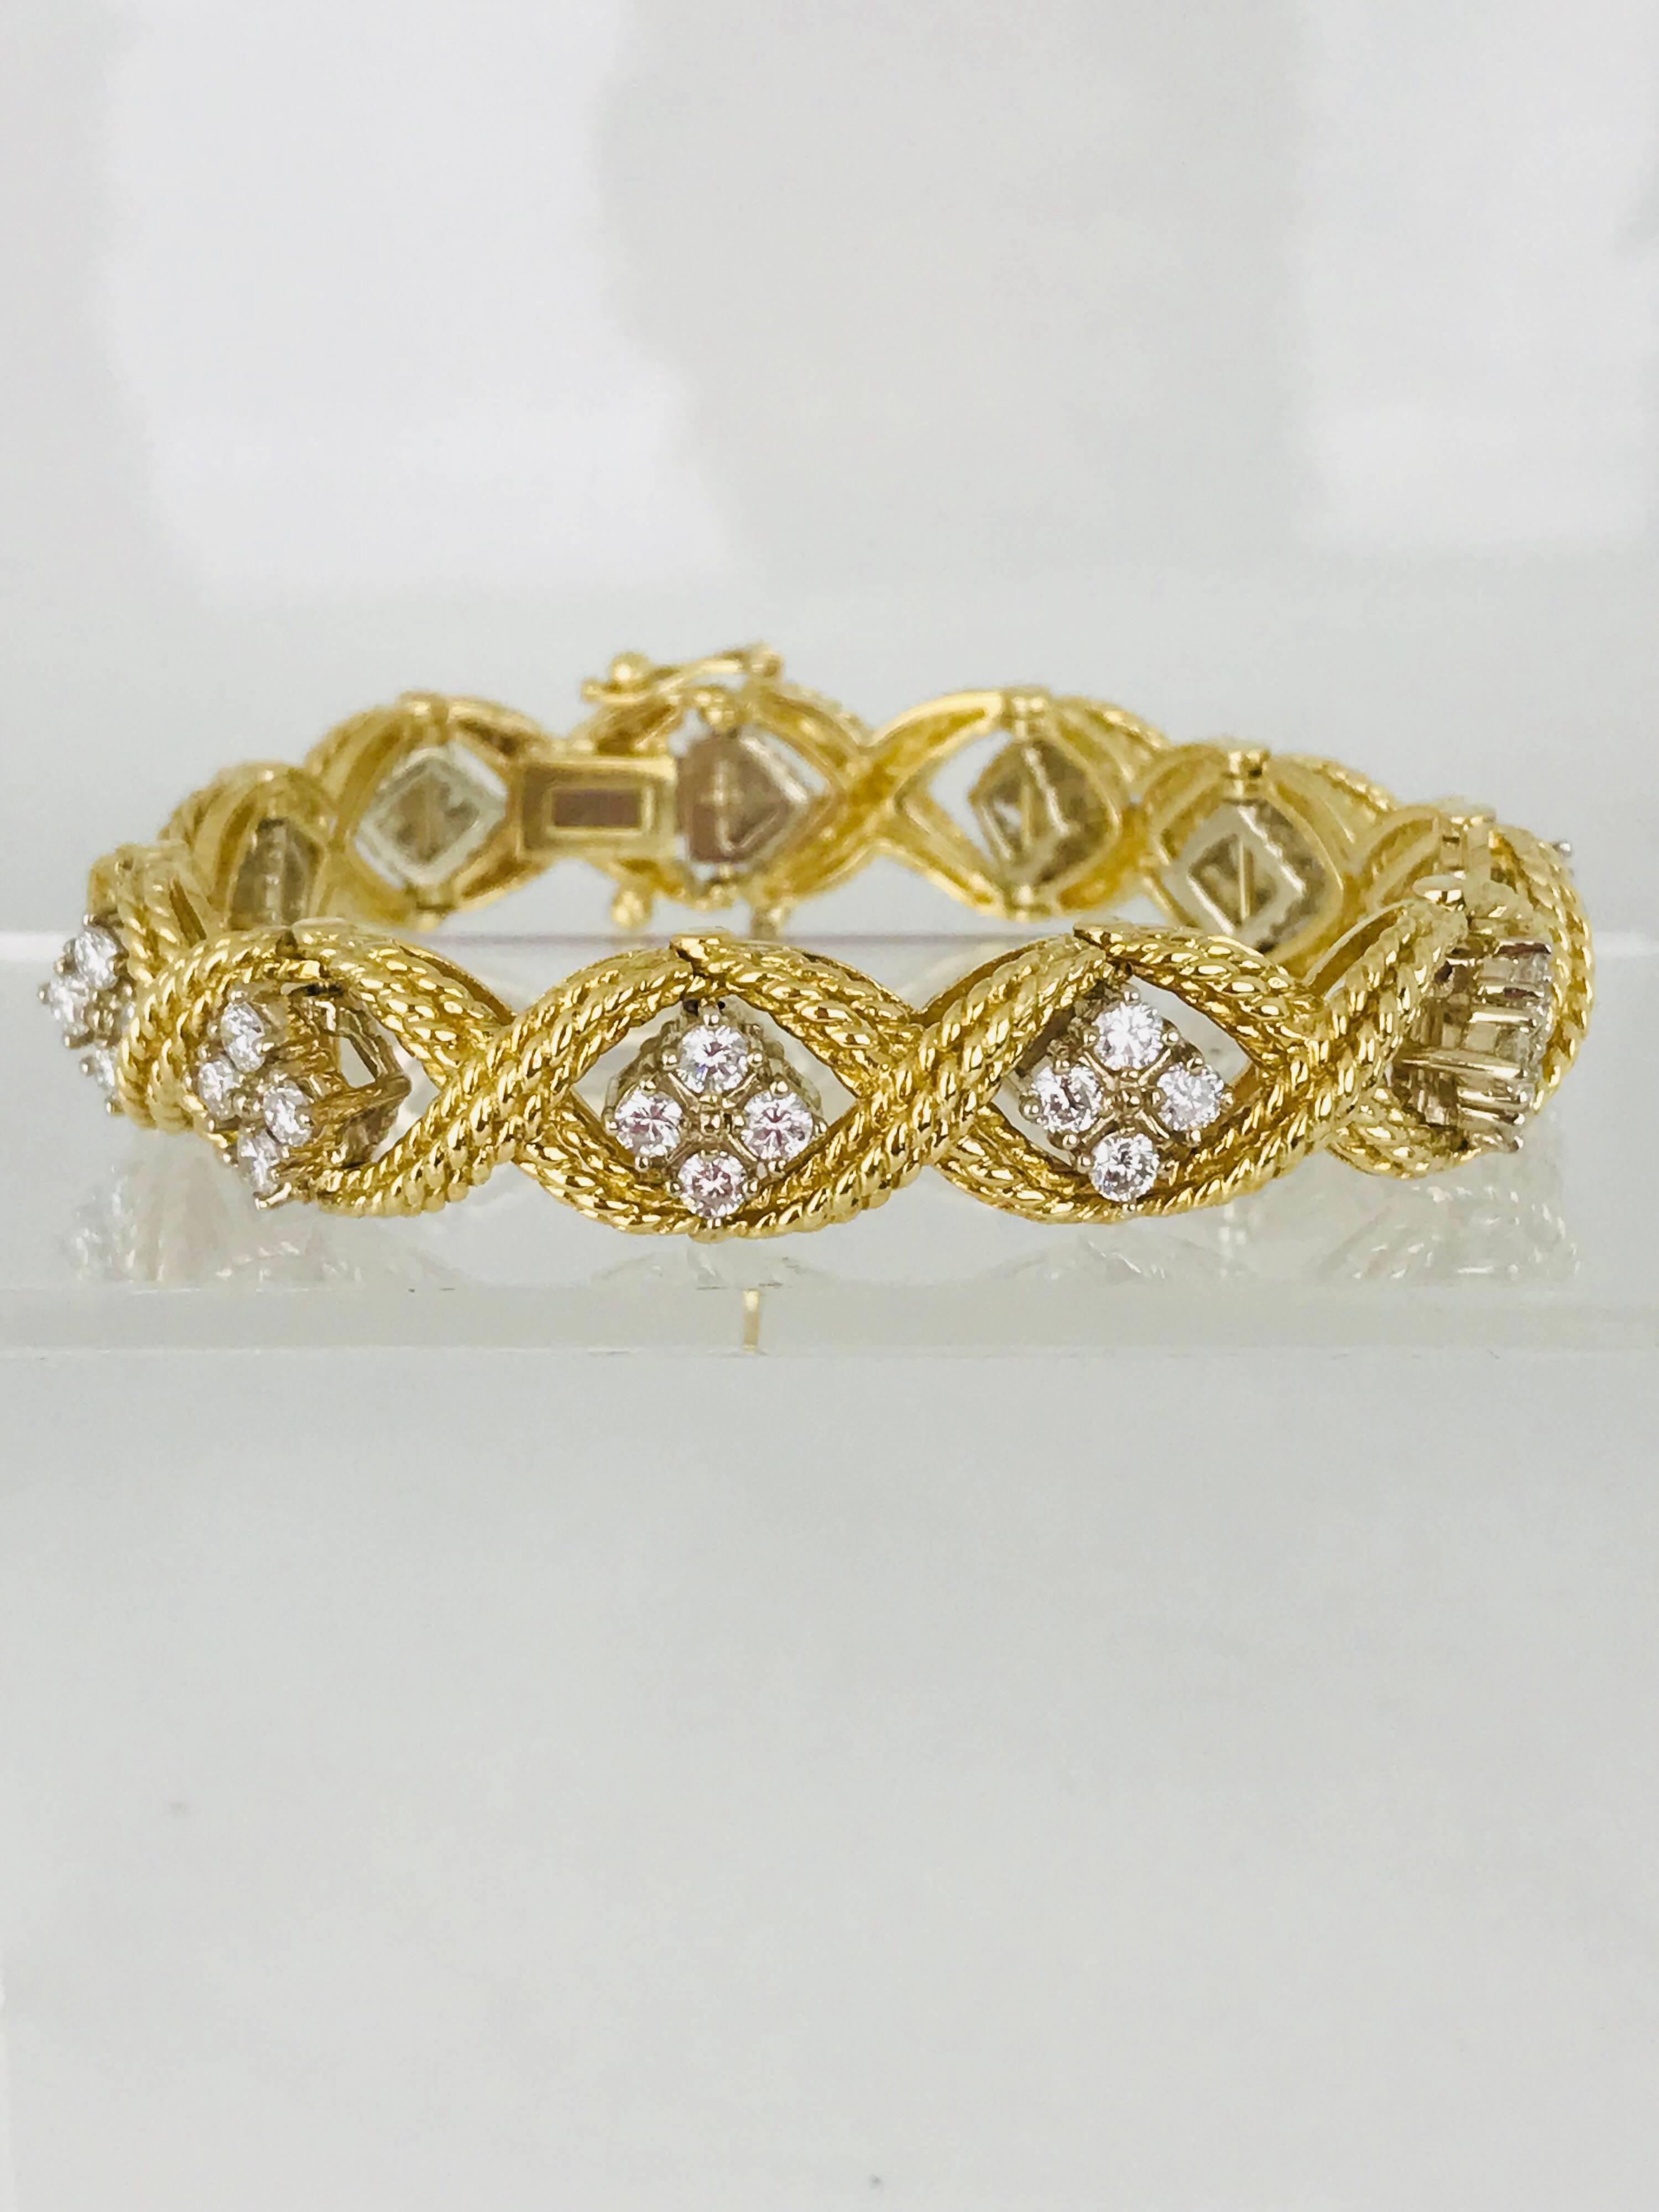 Modern Midcentury, Diamond Link Bracelet with 3.00 Carat Total Weight For Sale